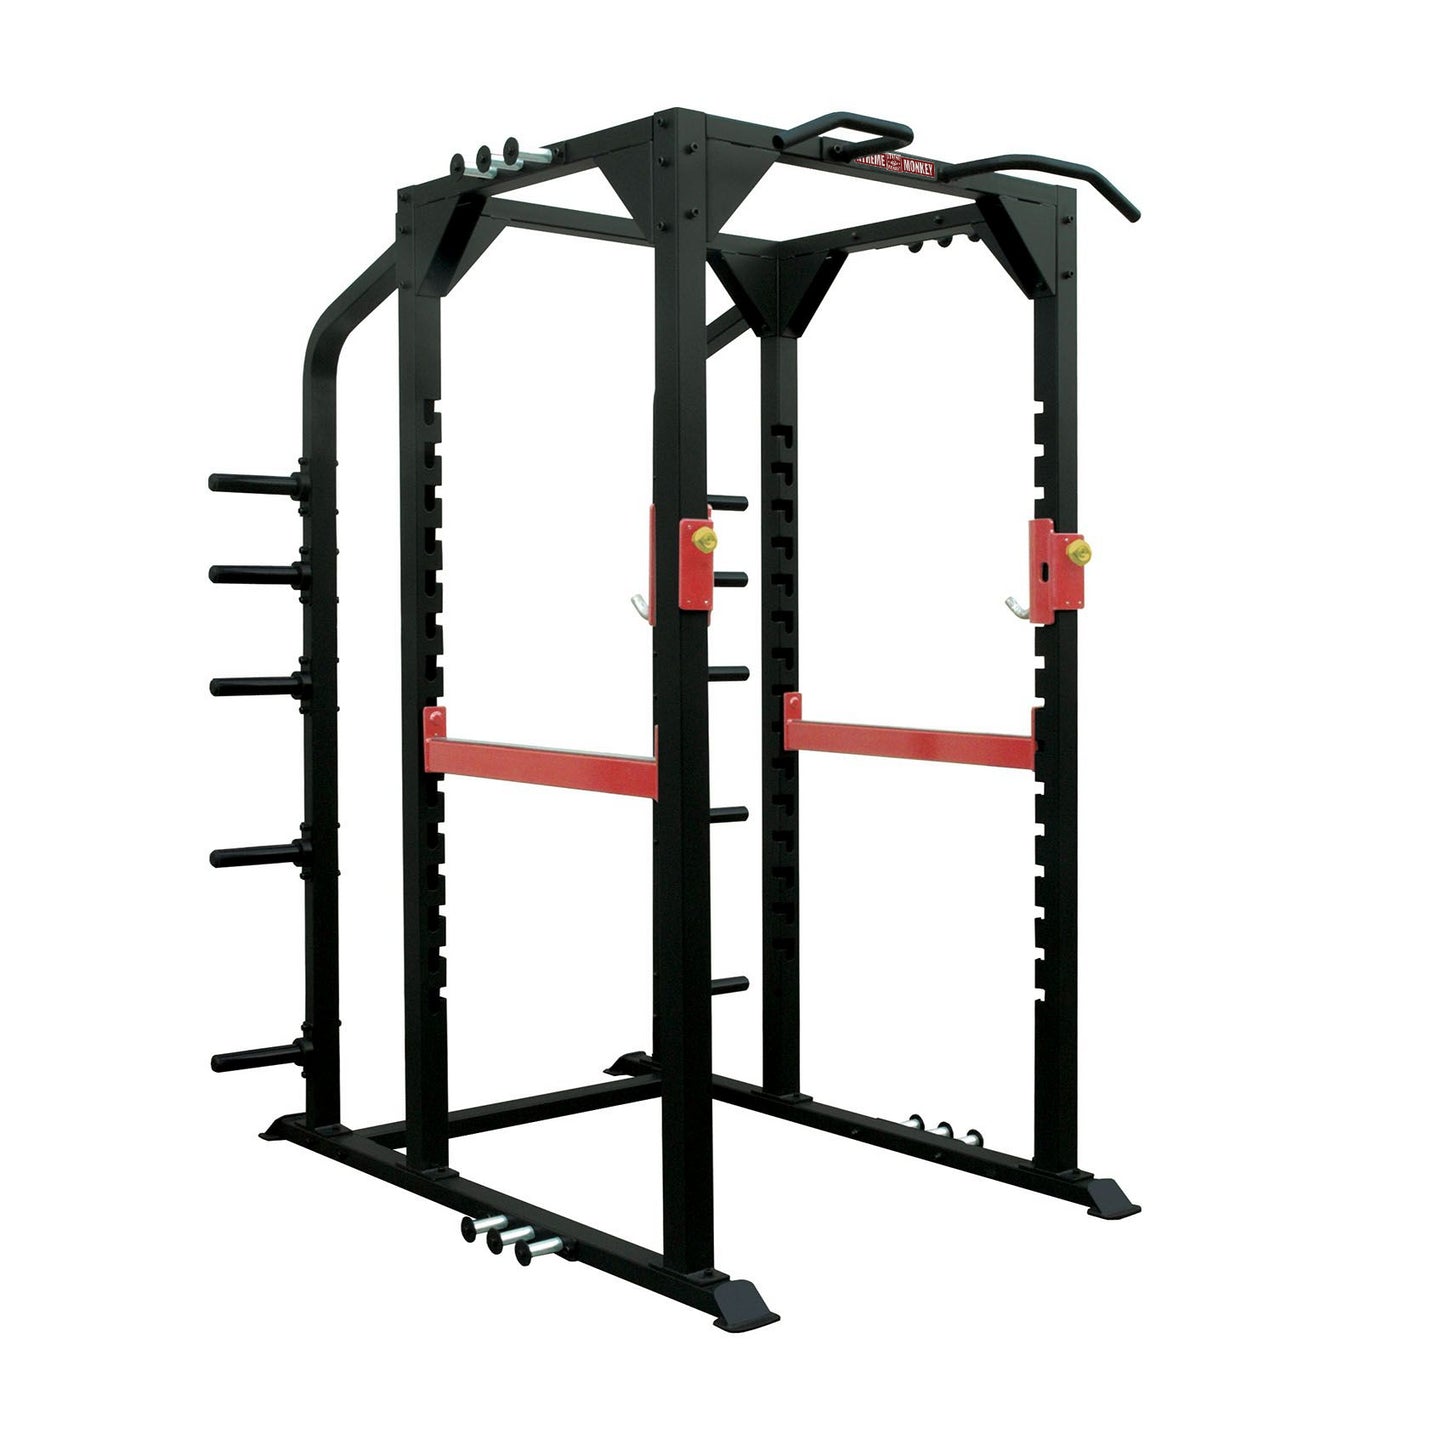 XM FITNESS Commercial Power Rack Strength Machines Canada.